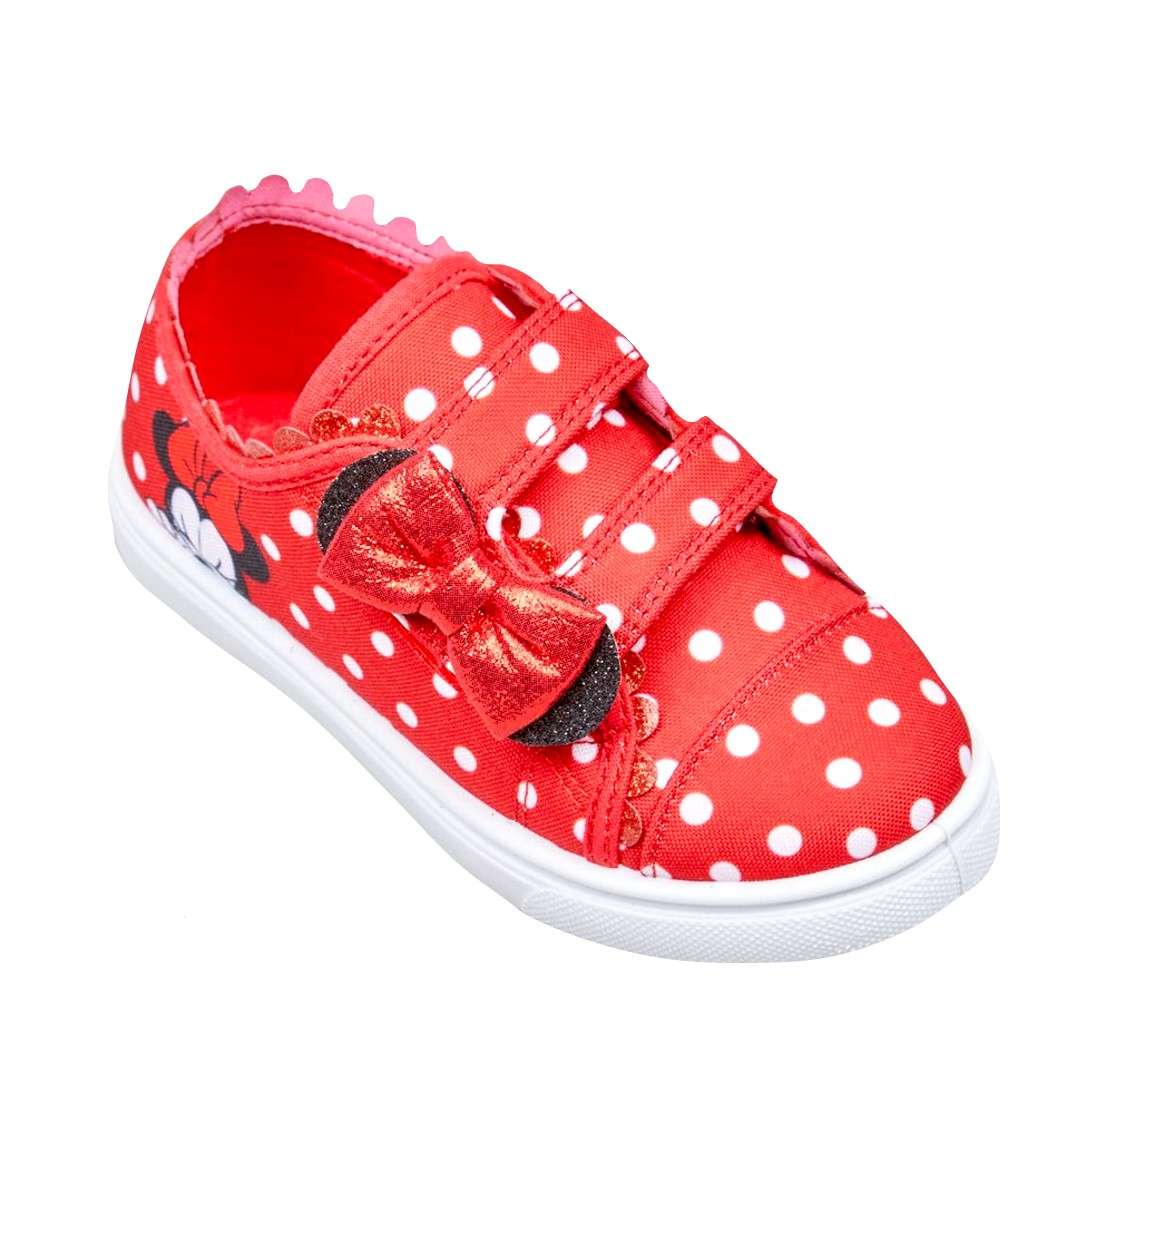 Disney Minnie Mouse Girls Red Polka Dot Canvas Pumps